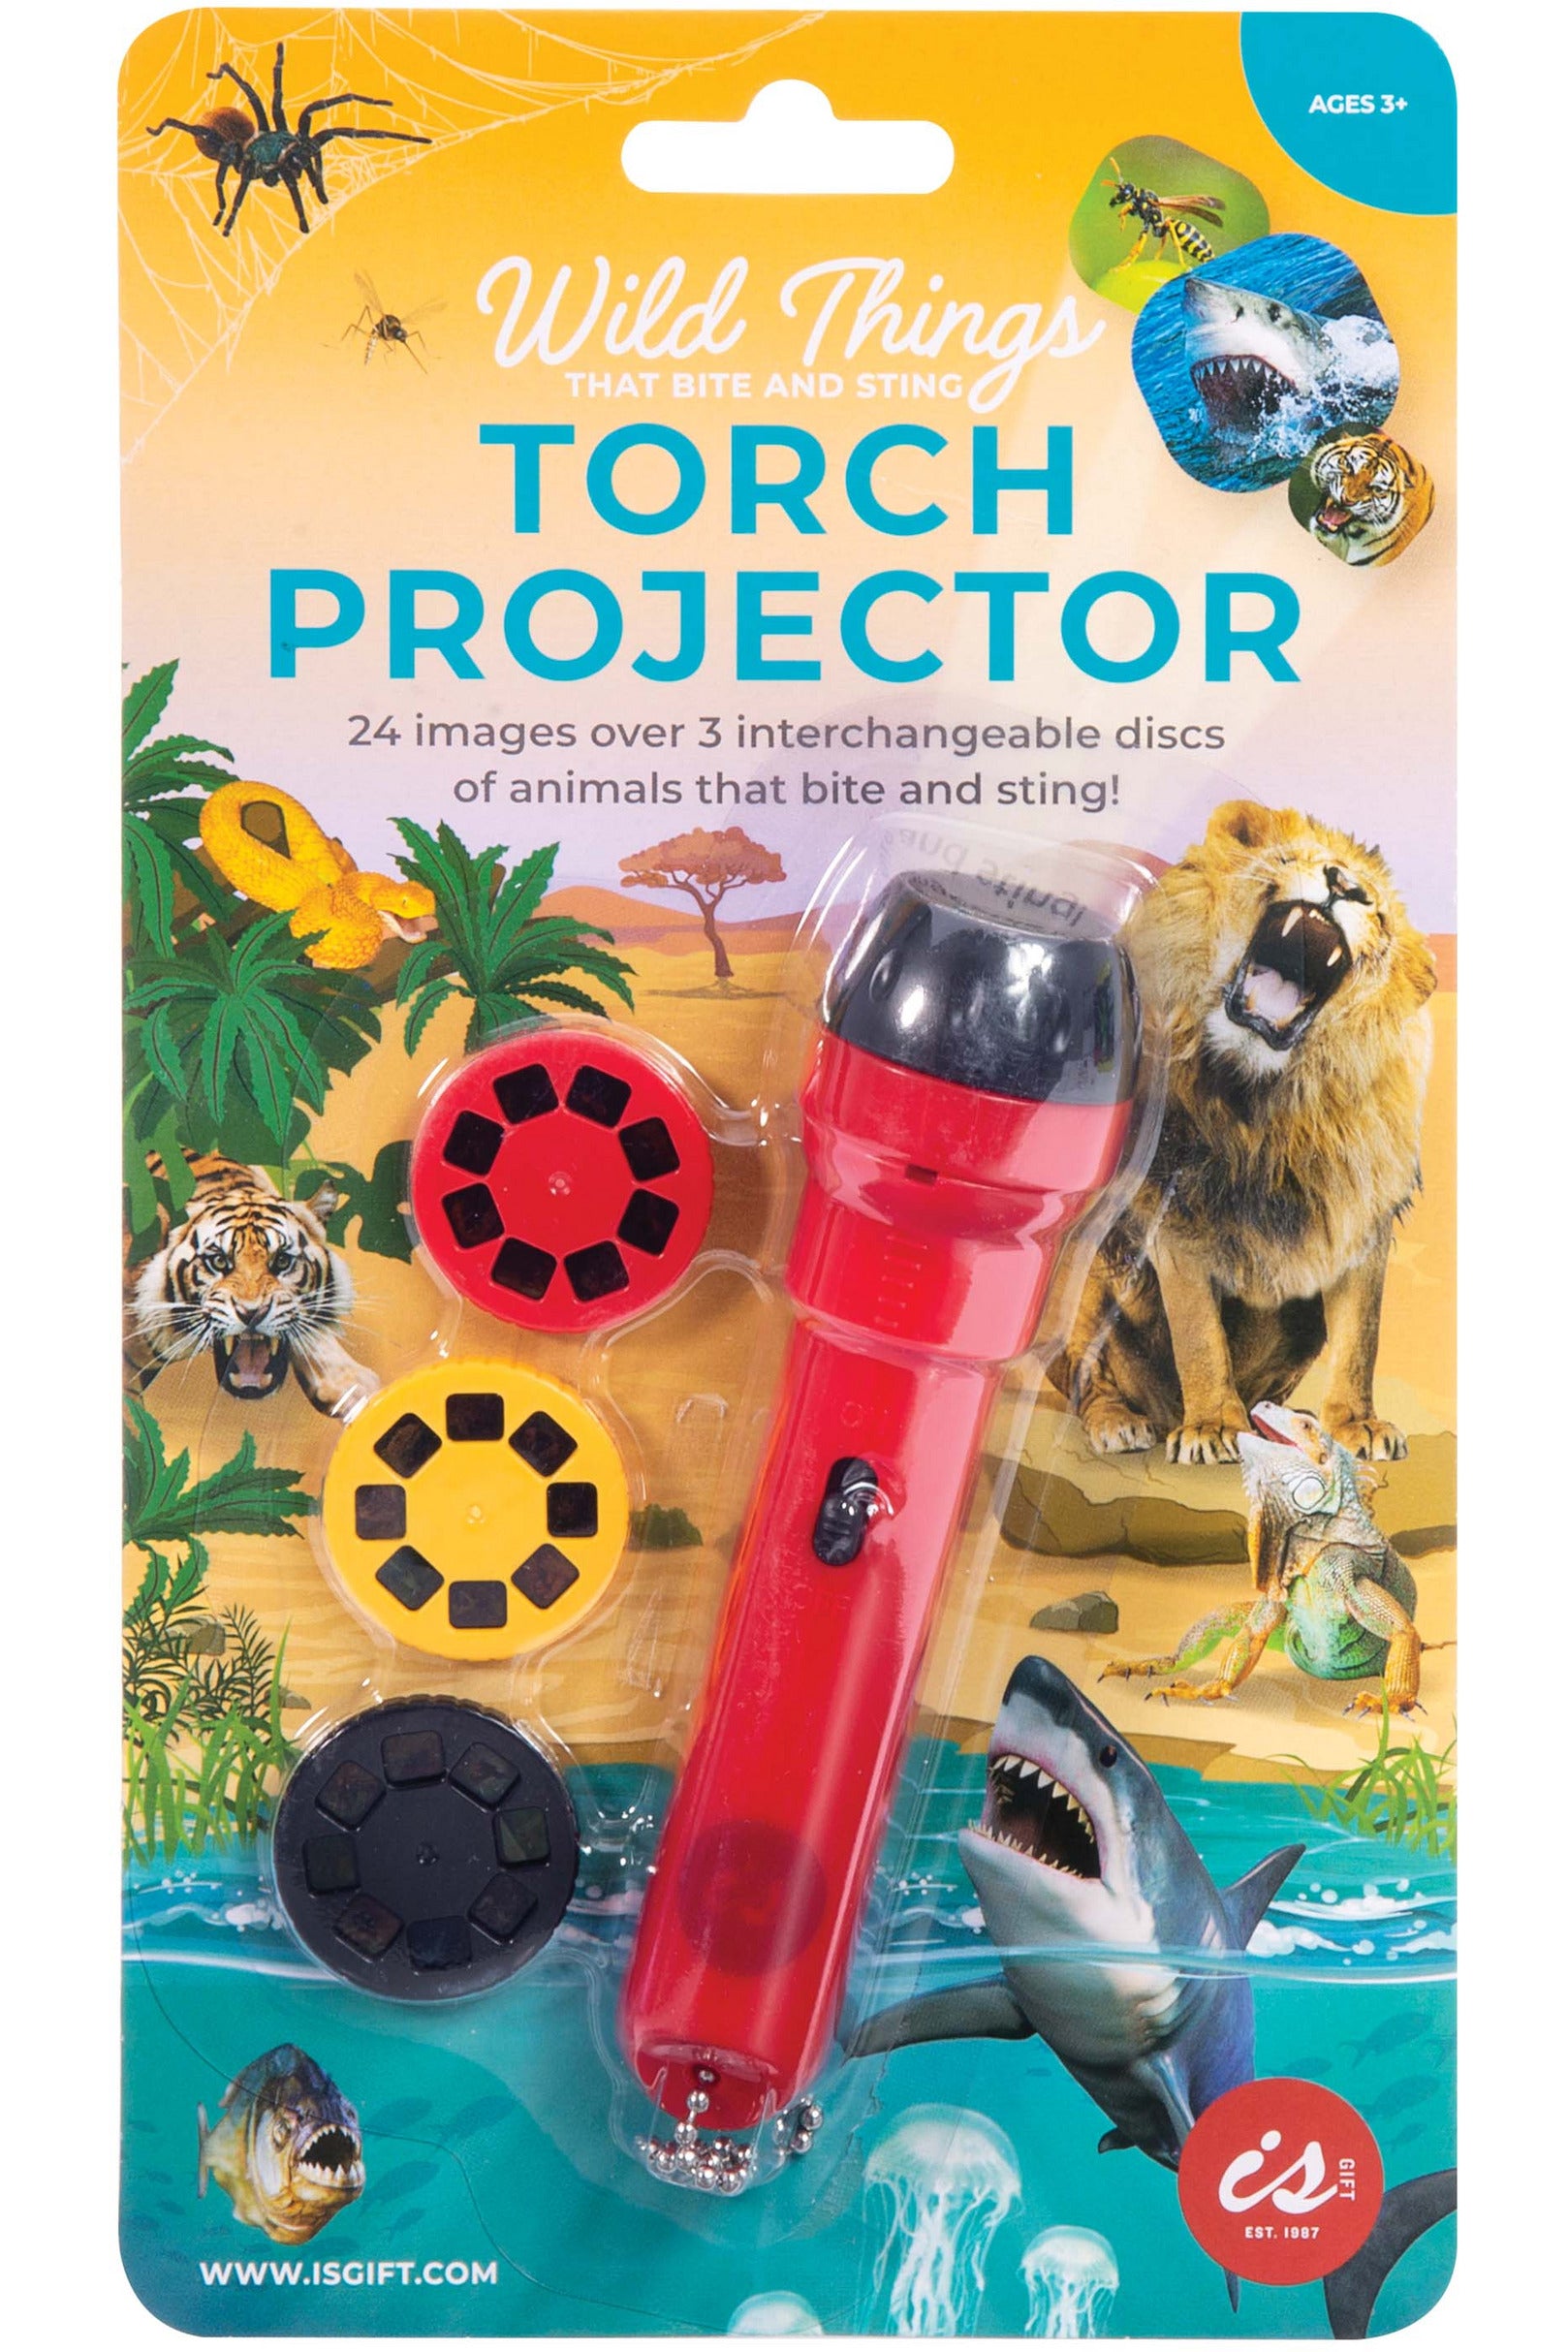 Torch Projector - Wild Things